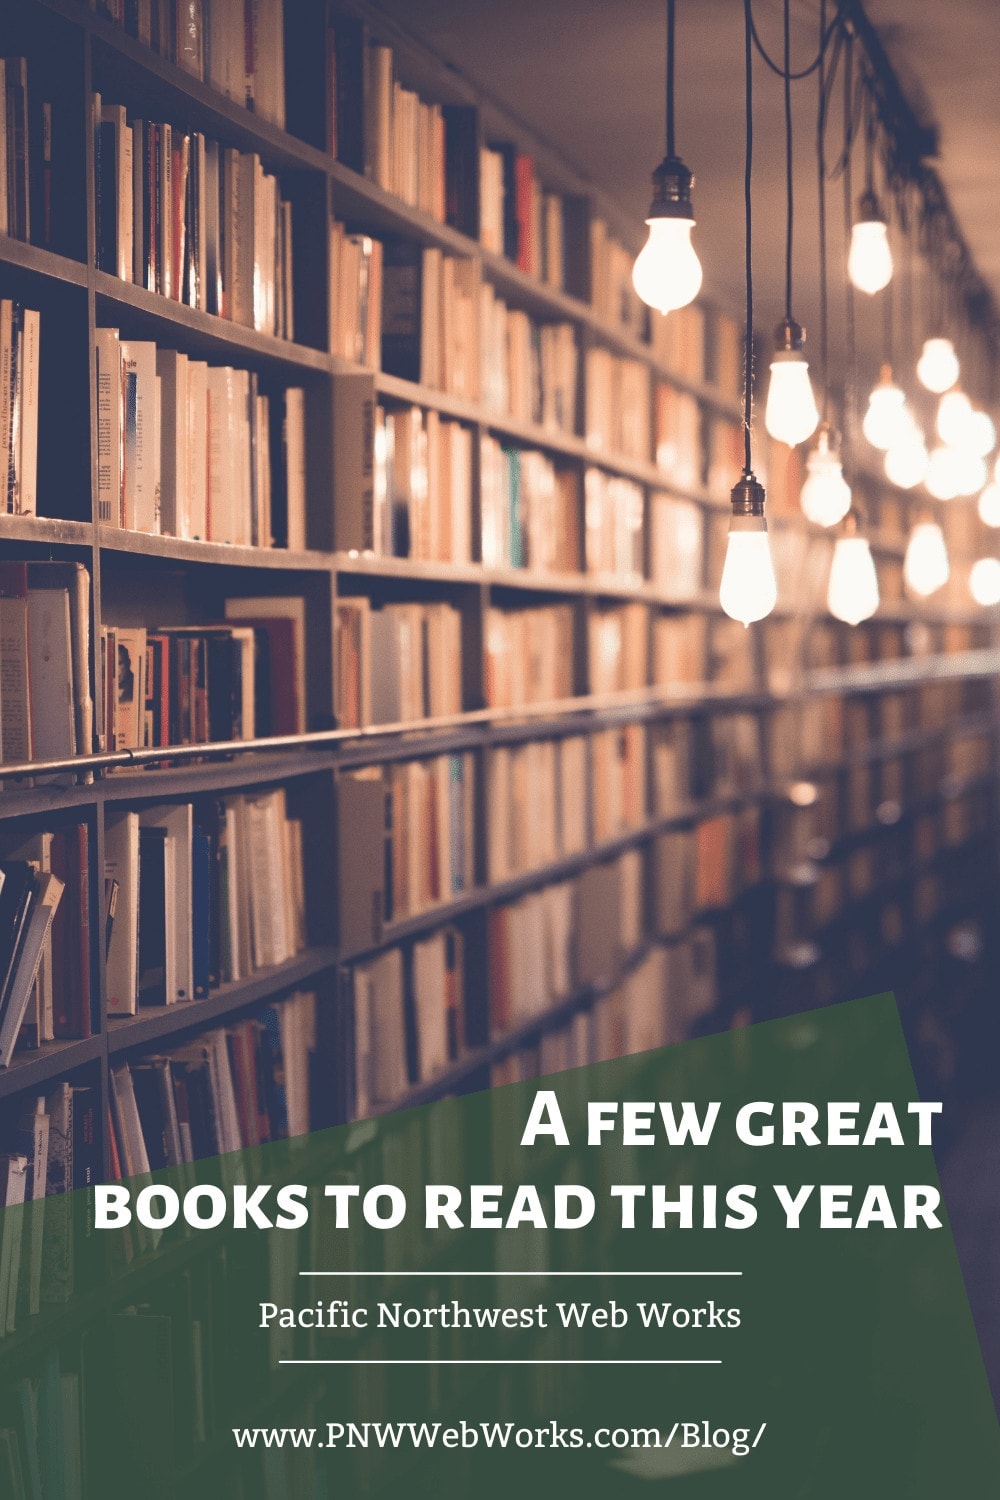 A few great books to read this year